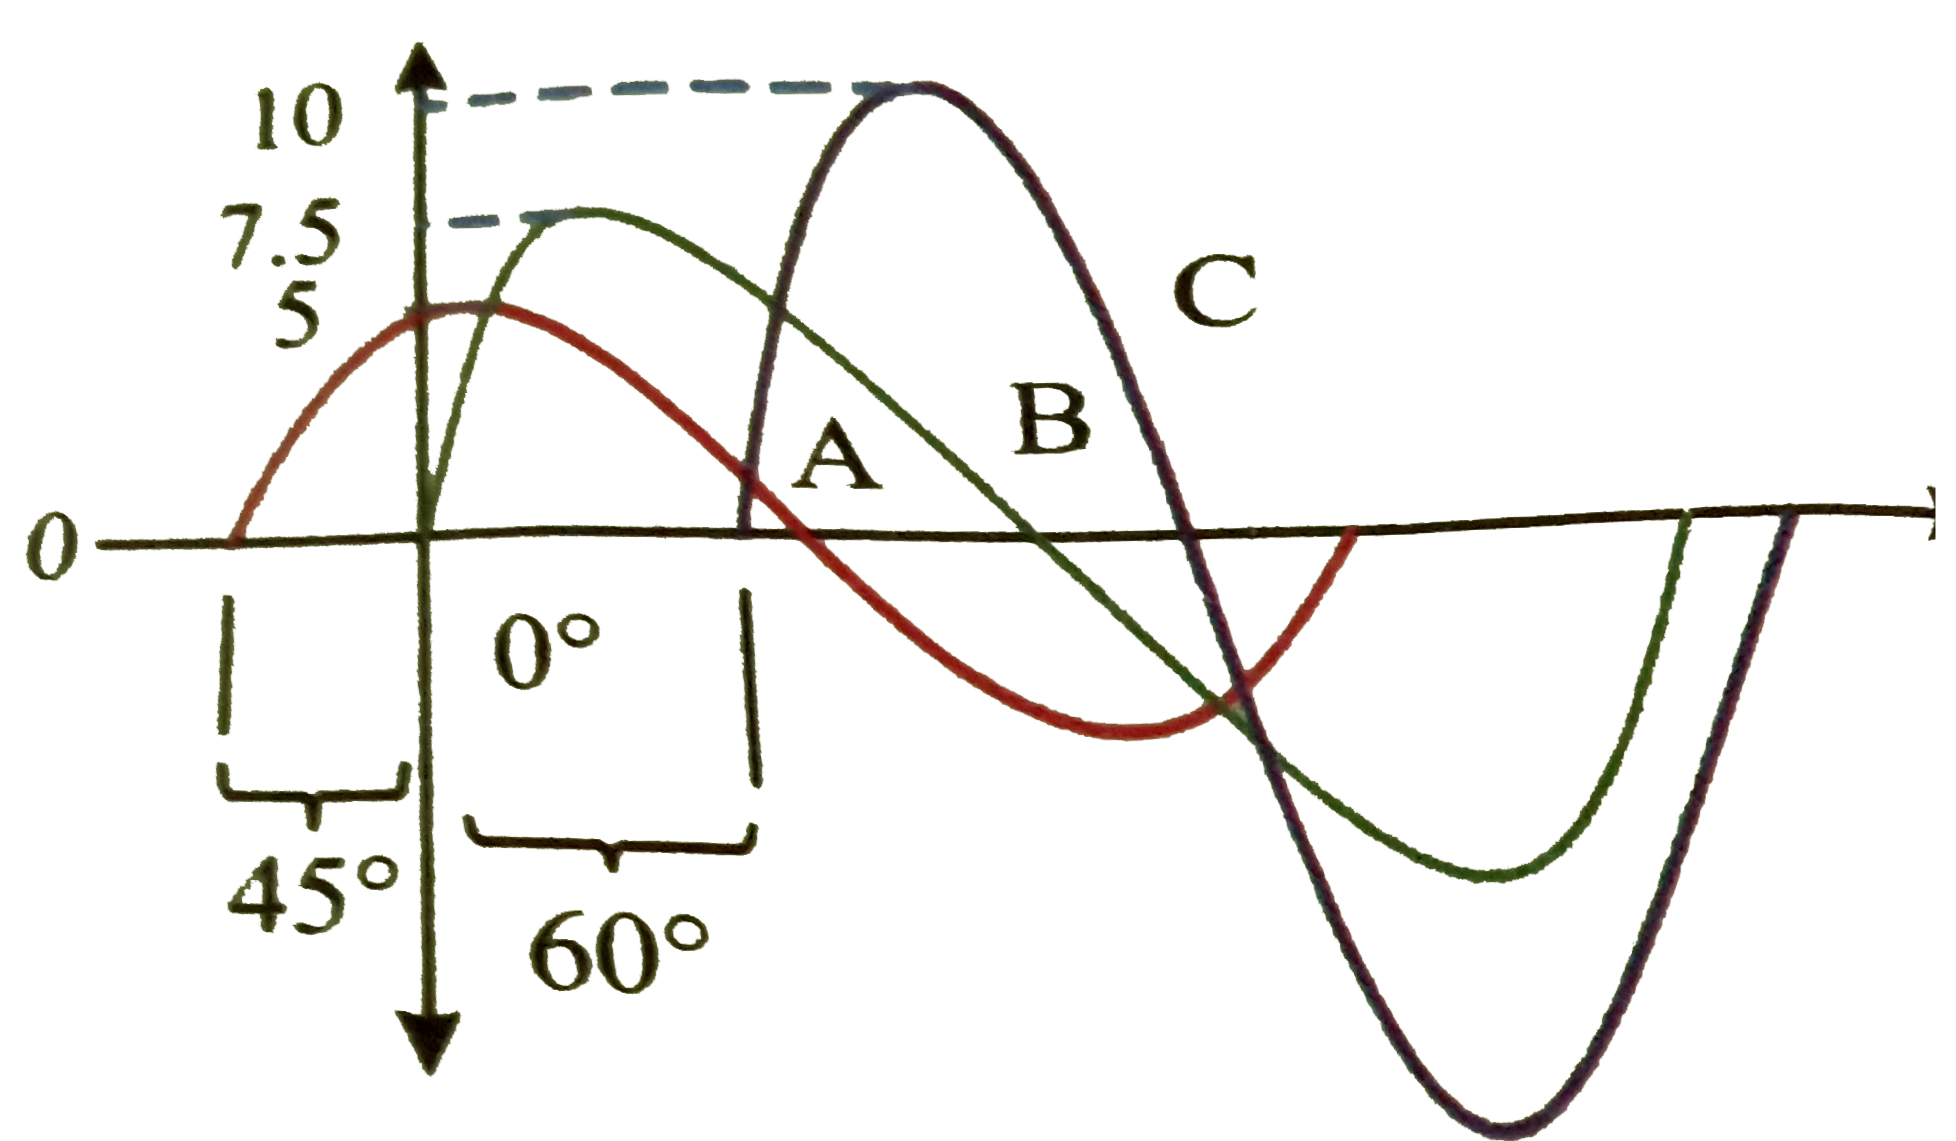 Use a phasor diagram to represent the sine waves in the following Figure.